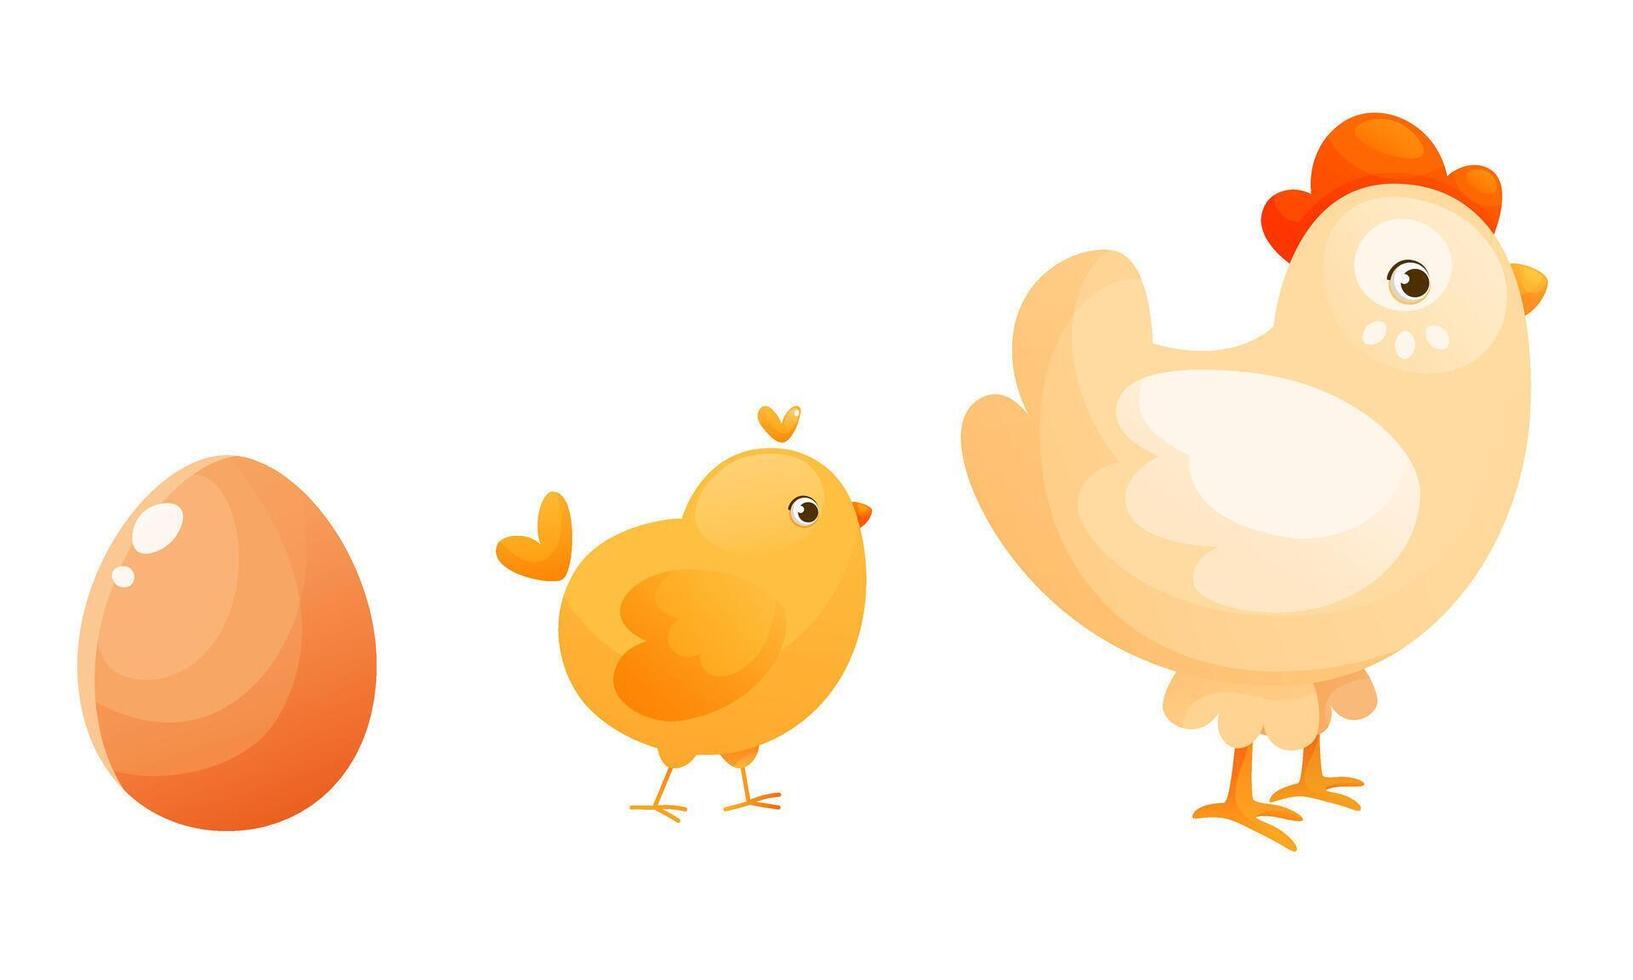 The process of hatching and raising a chicken, the stages of turning an egg into a chicken. vector